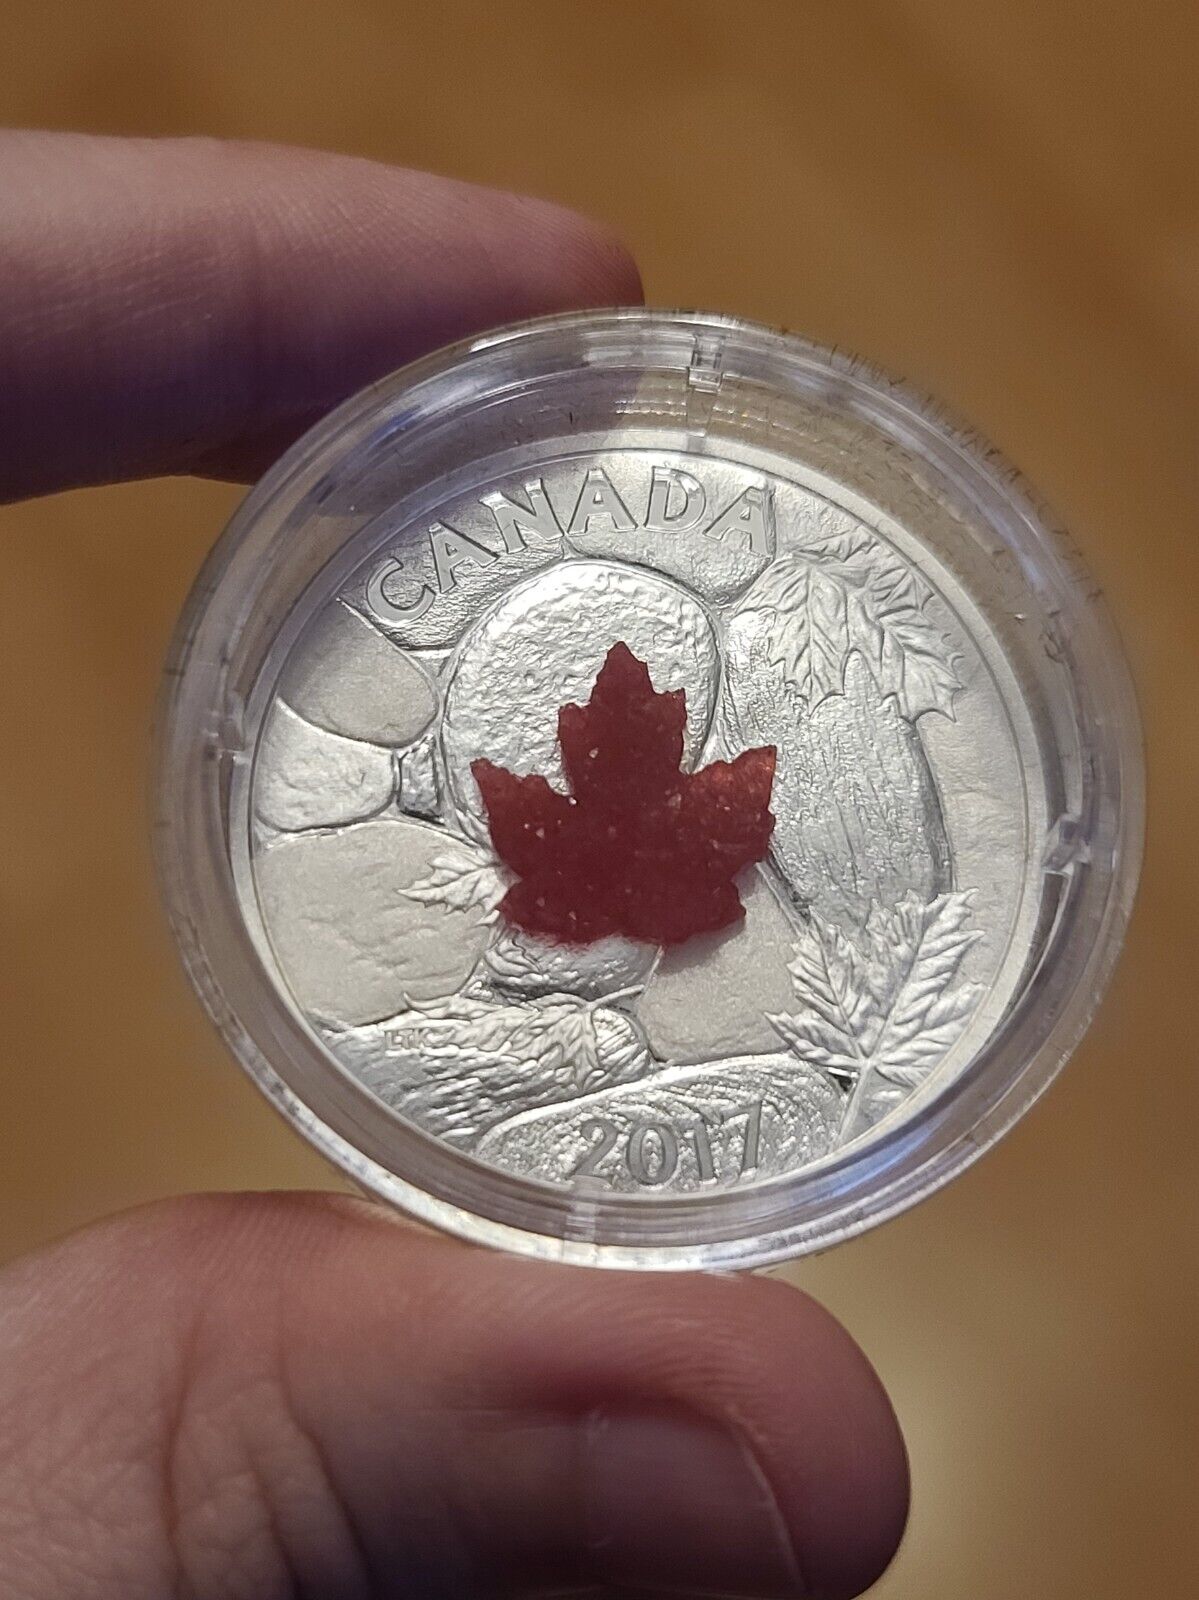 1 Oz Silver Coin 2017 $20 Canada Majestic Maple Leaves with Drusy Stone-classypw.com-4